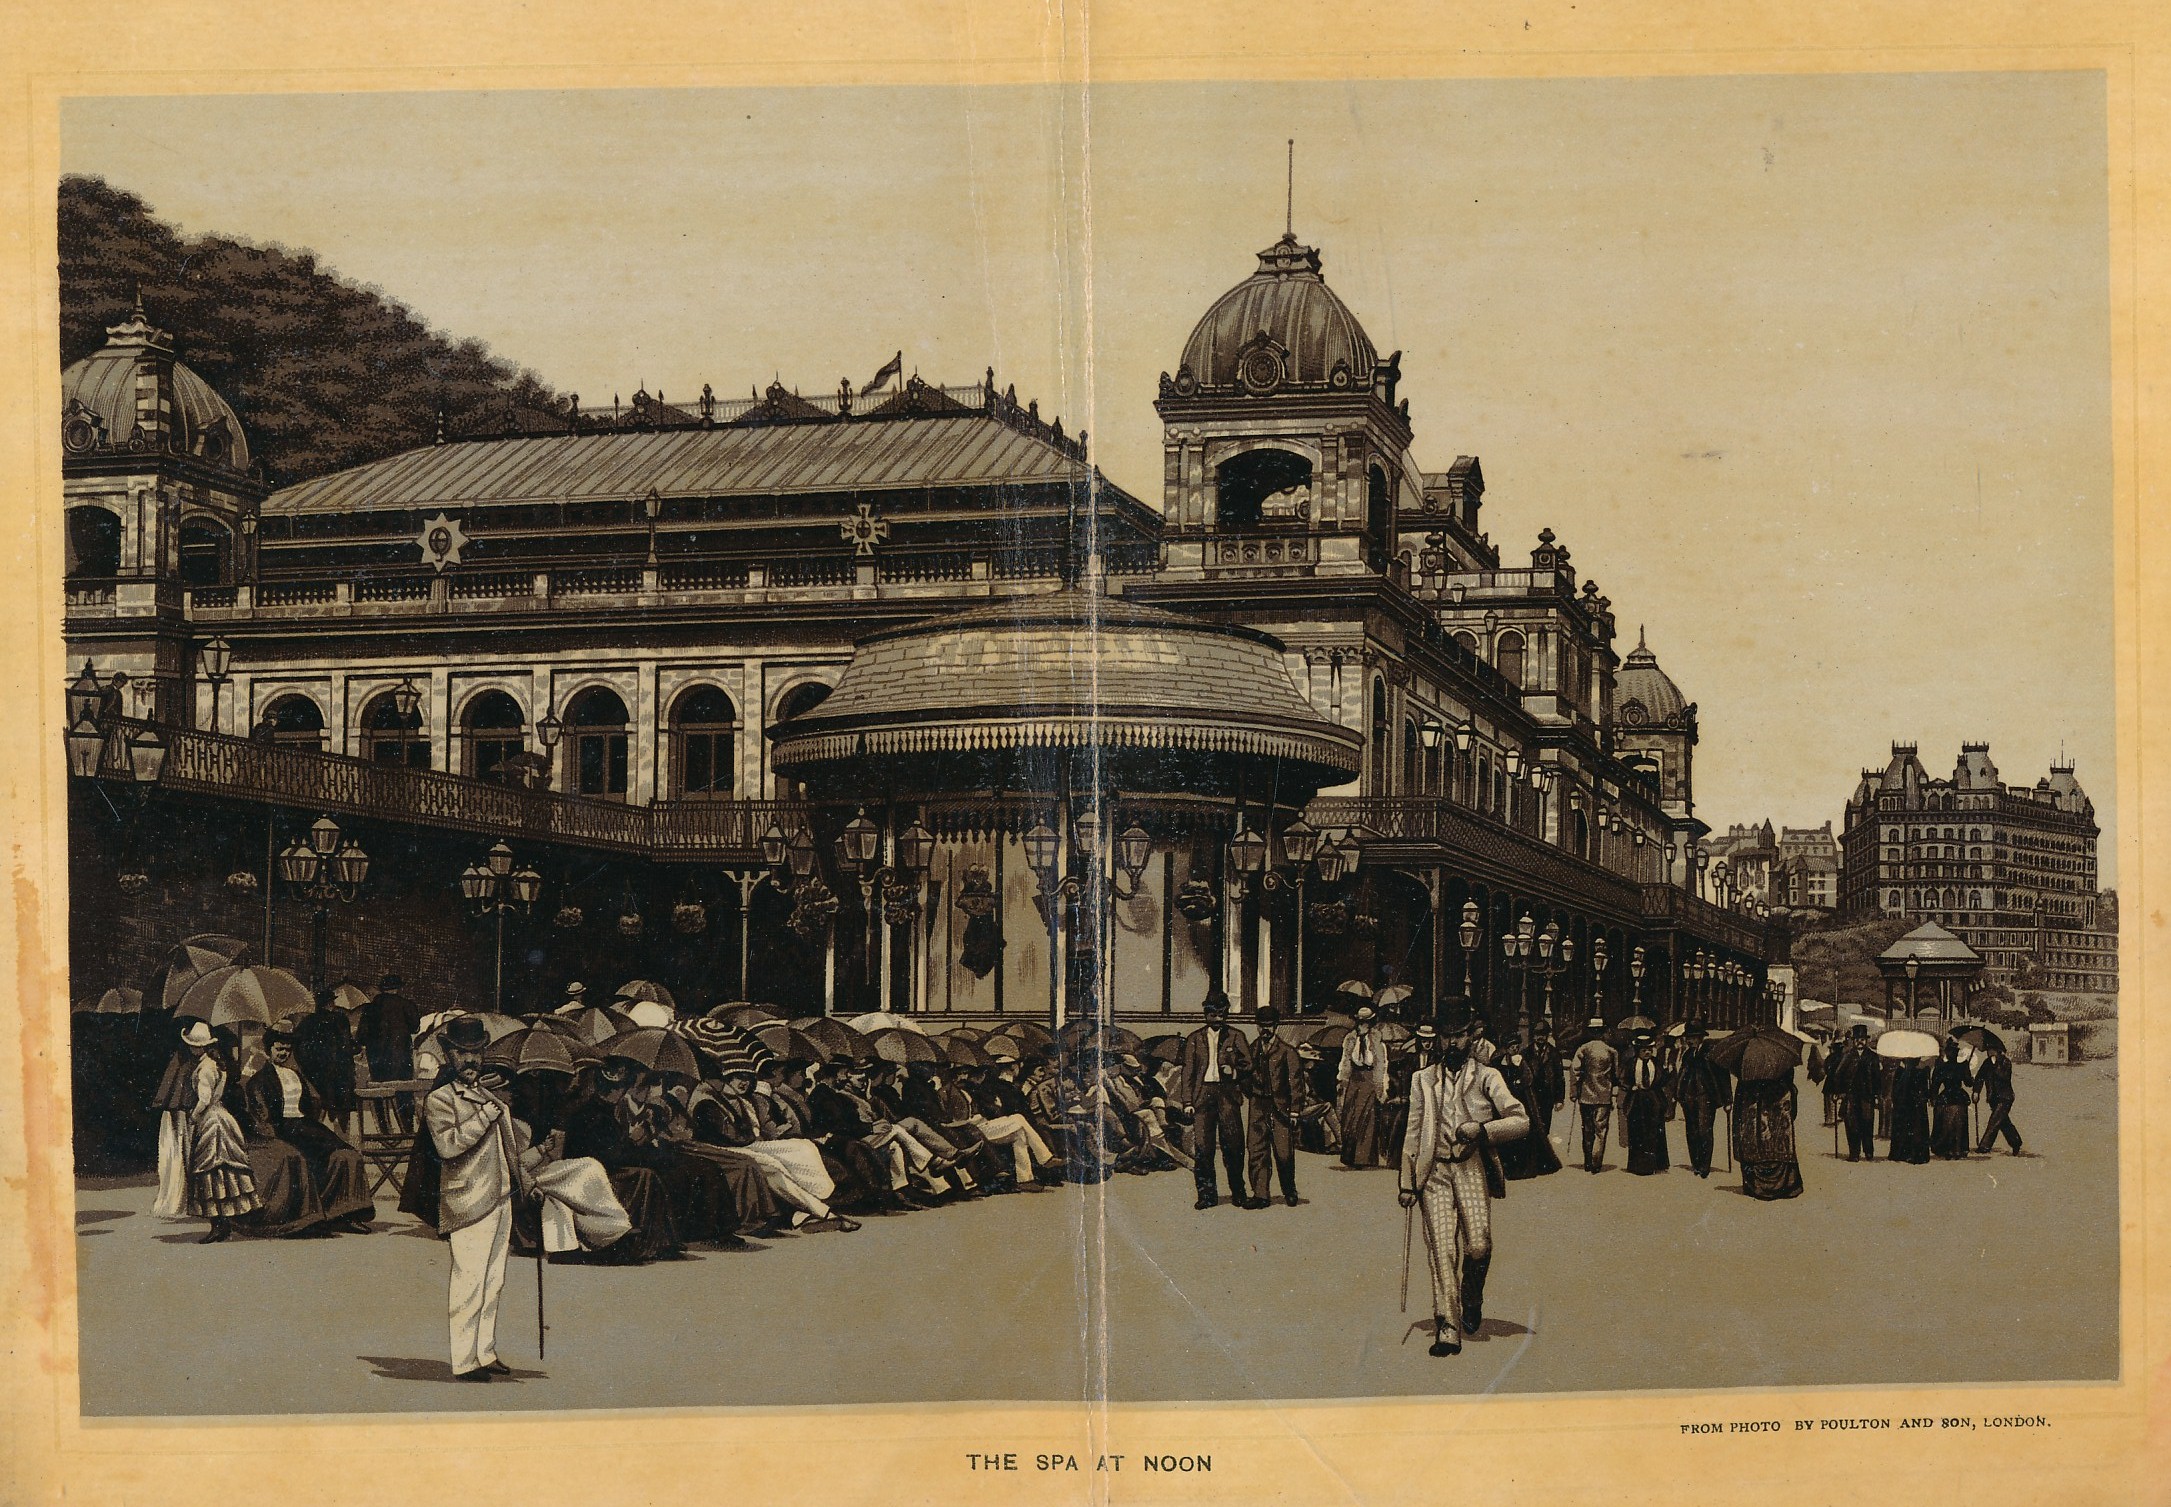 Album of Photo-Lithographic Views of Scarborough and District. The Camera Series.